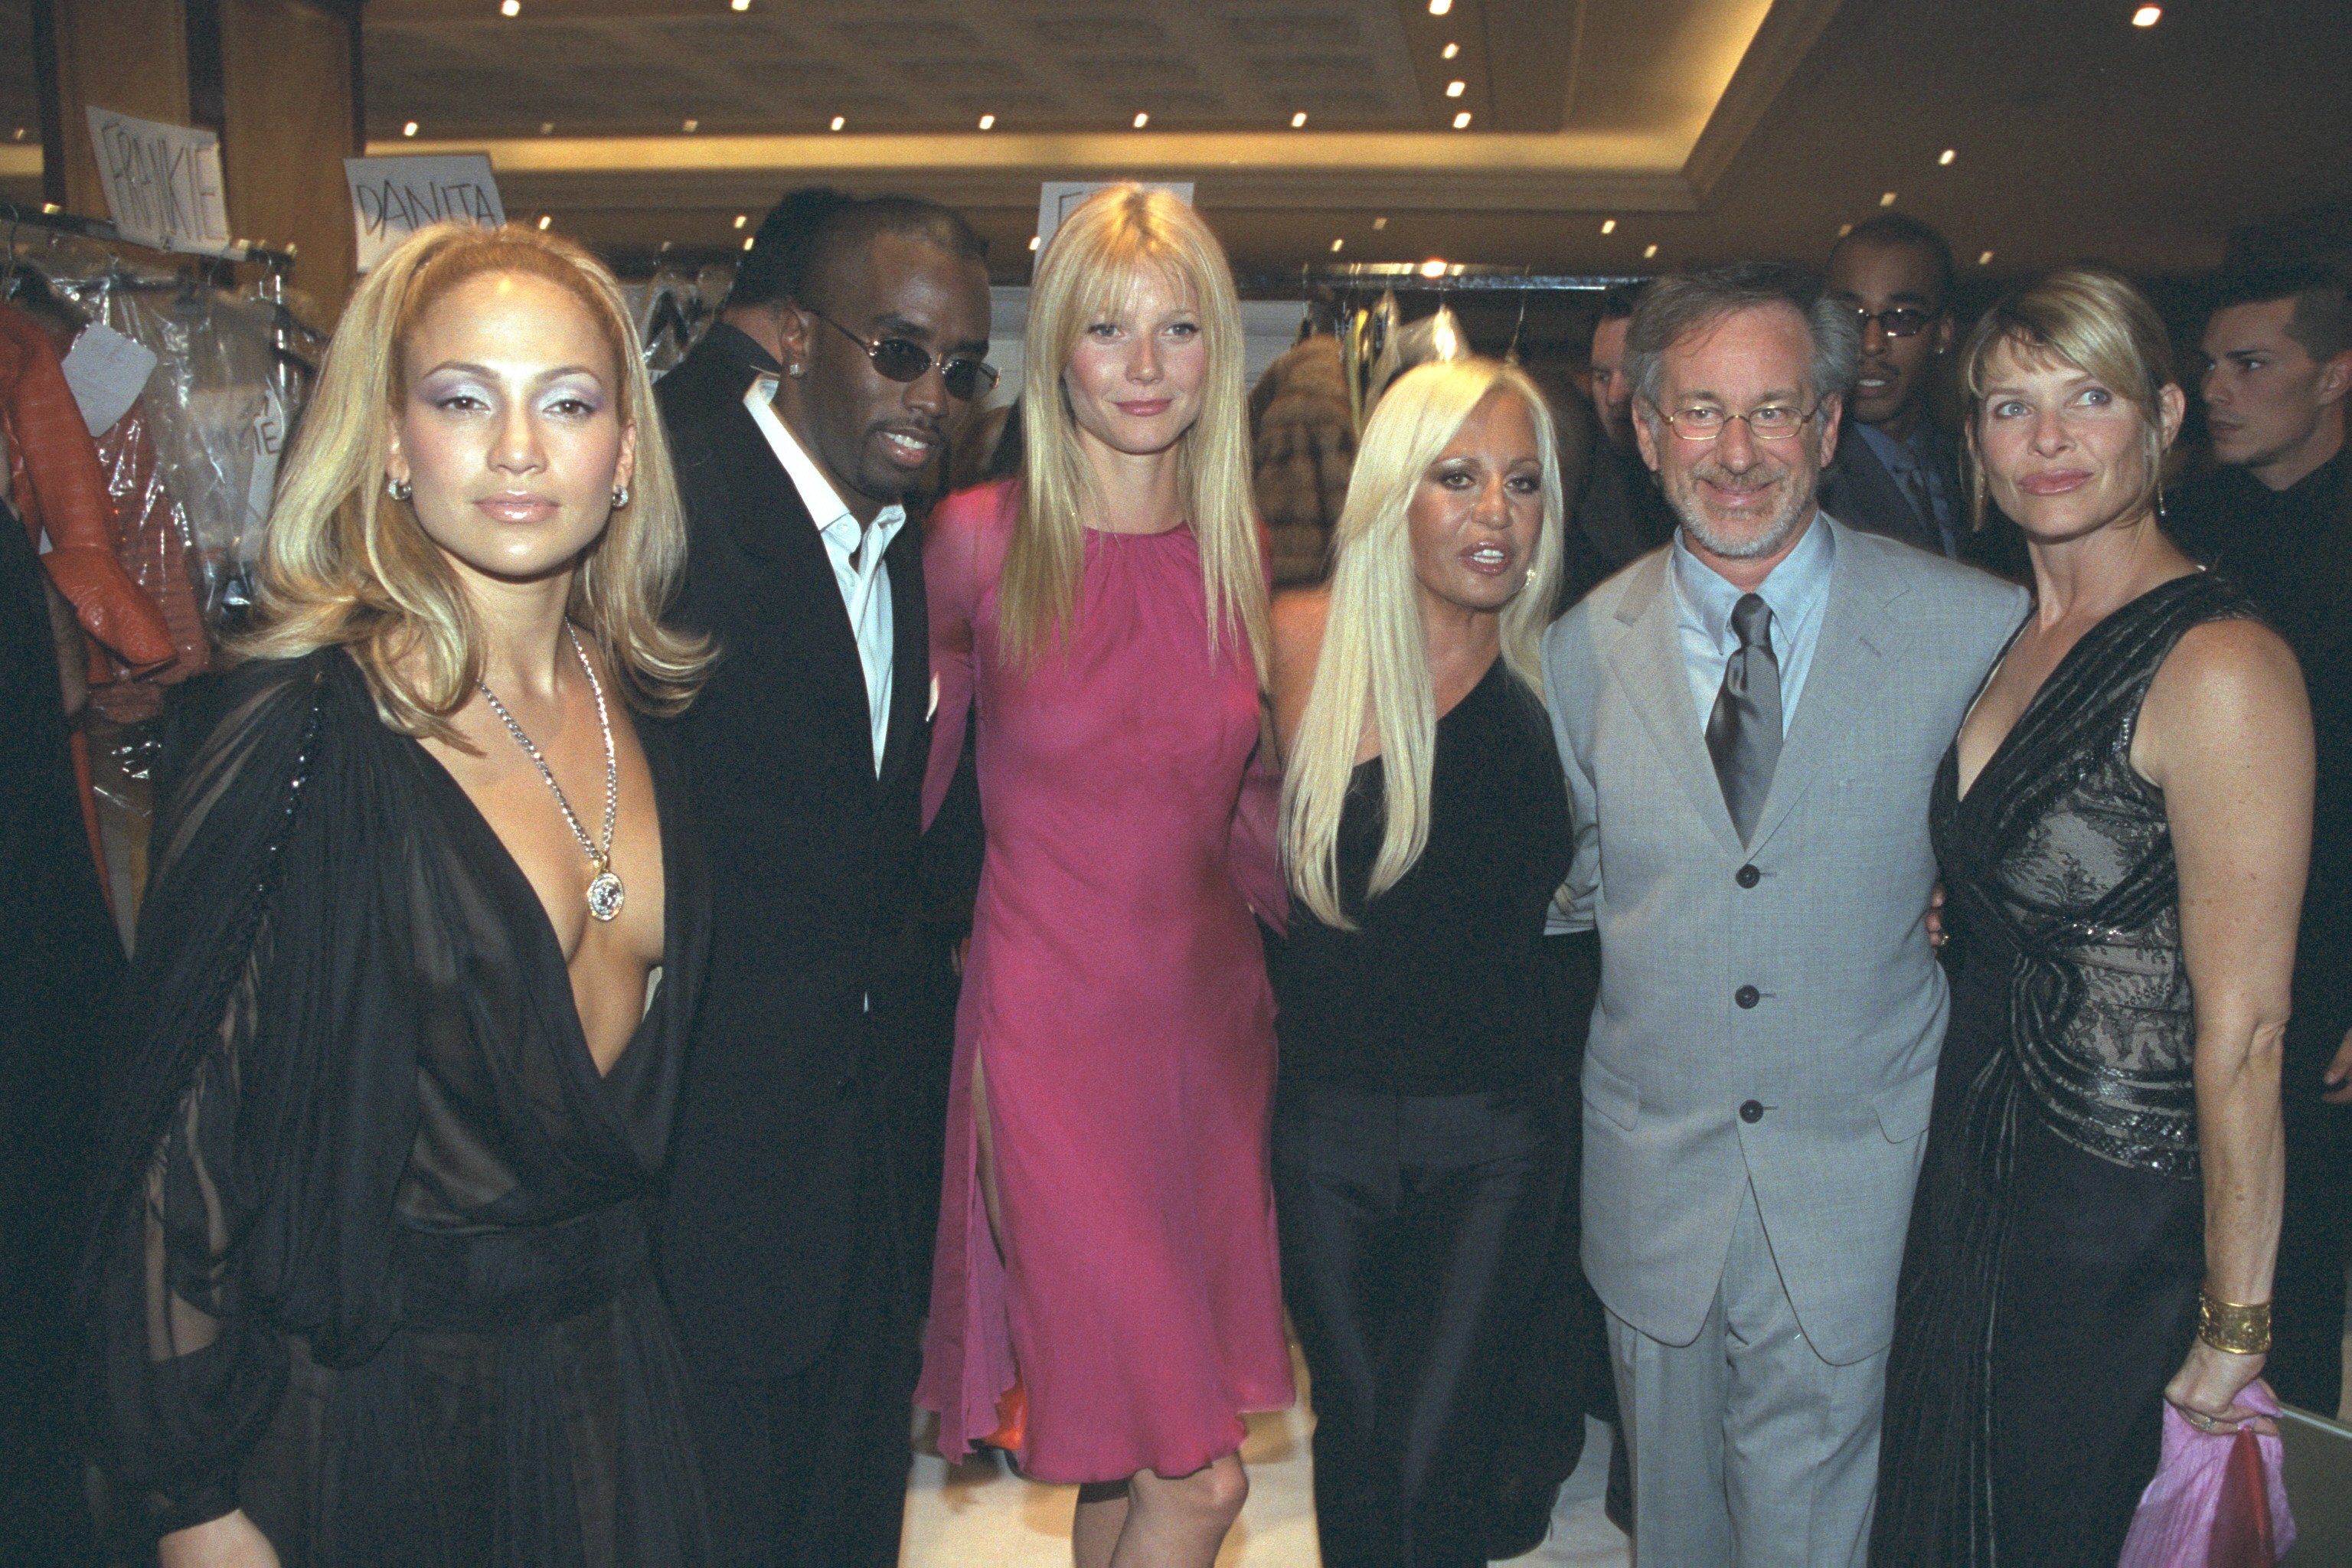 Jennifer Lopez, Sean 'Diddy' Combs, Gwyneth Paltrow, Donatella Versace and Steven Spielberg with his wife Kate Capshaw | Stephane Cardinale/Sygma via Getty Images